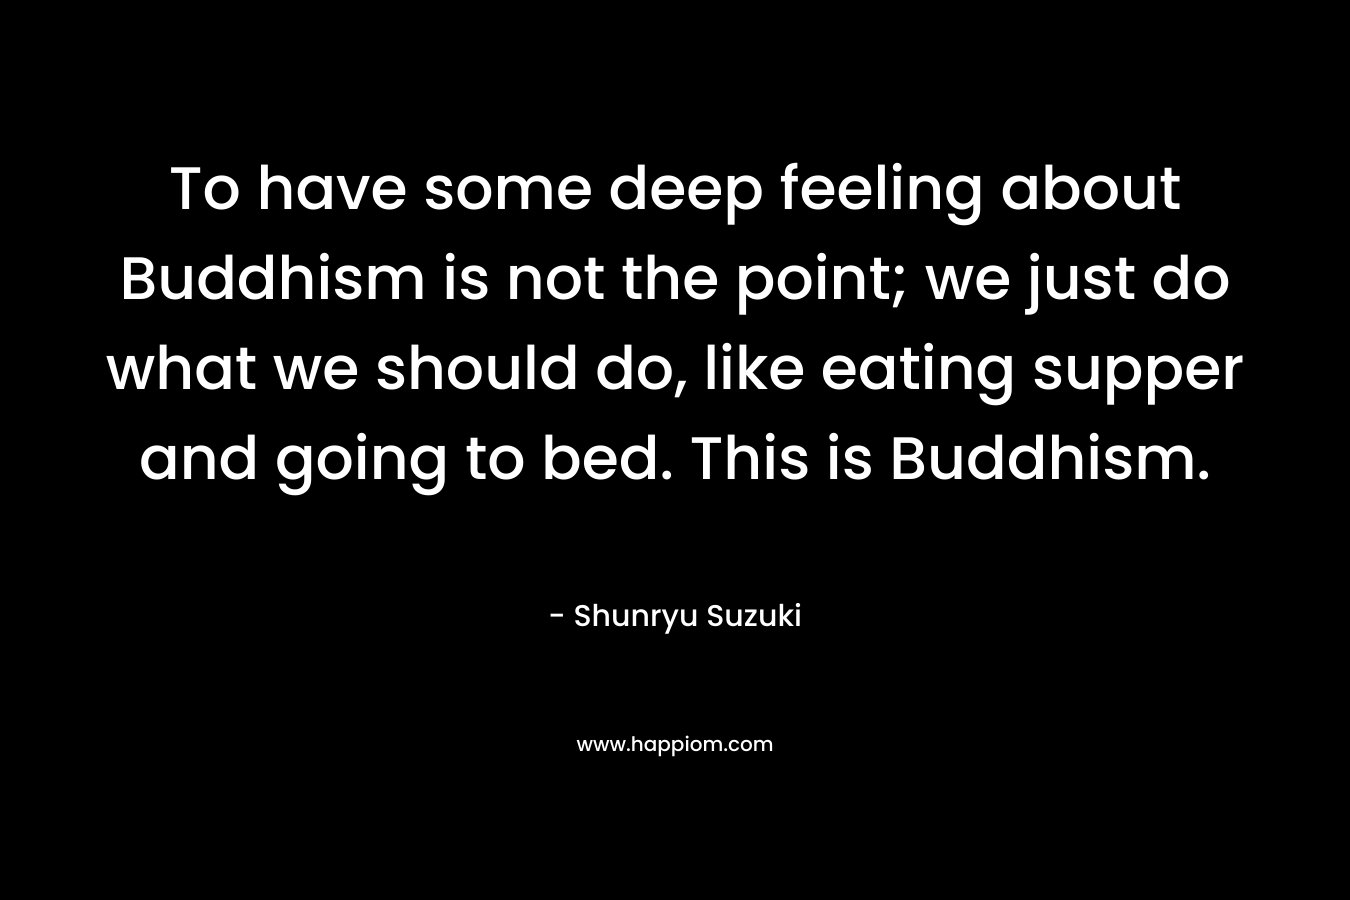 To have some deep feeling about Buddhism is not the point; we just do what we should do, like eating supper and going to bed. This is Buddhism. – Shunryu Suzuki